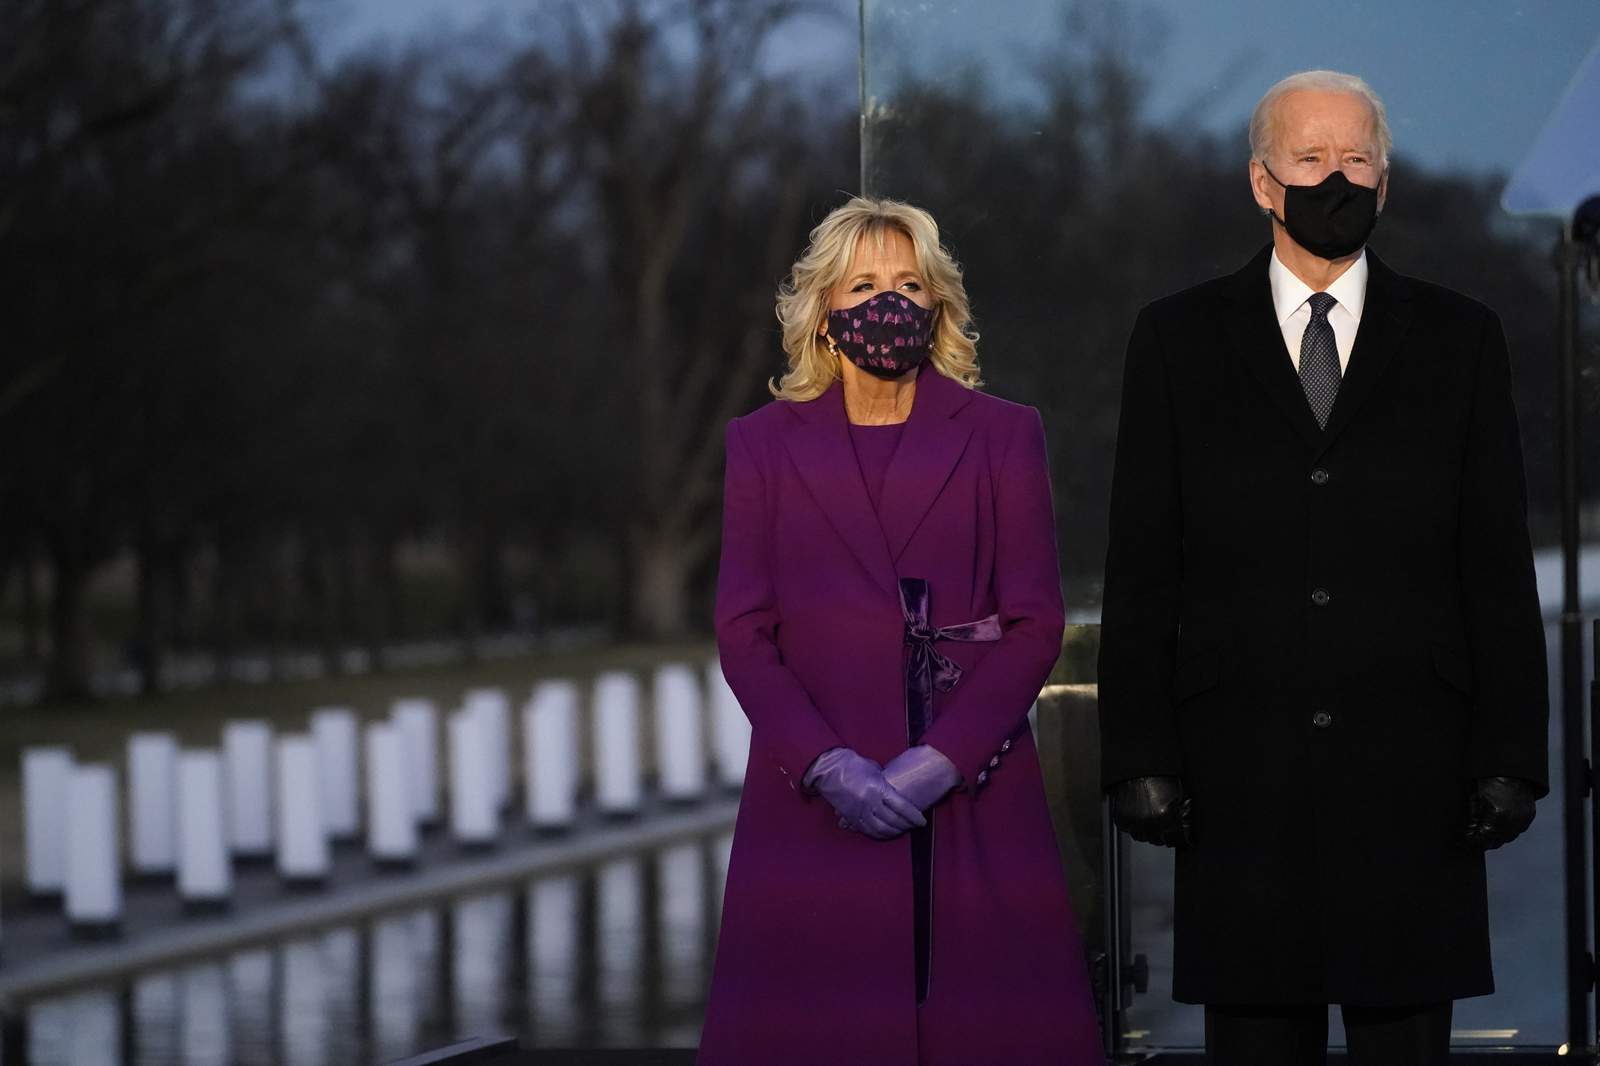 Inauguration updates: Joe Biden calls on Americans to remember those who lost their lives to COVID-19